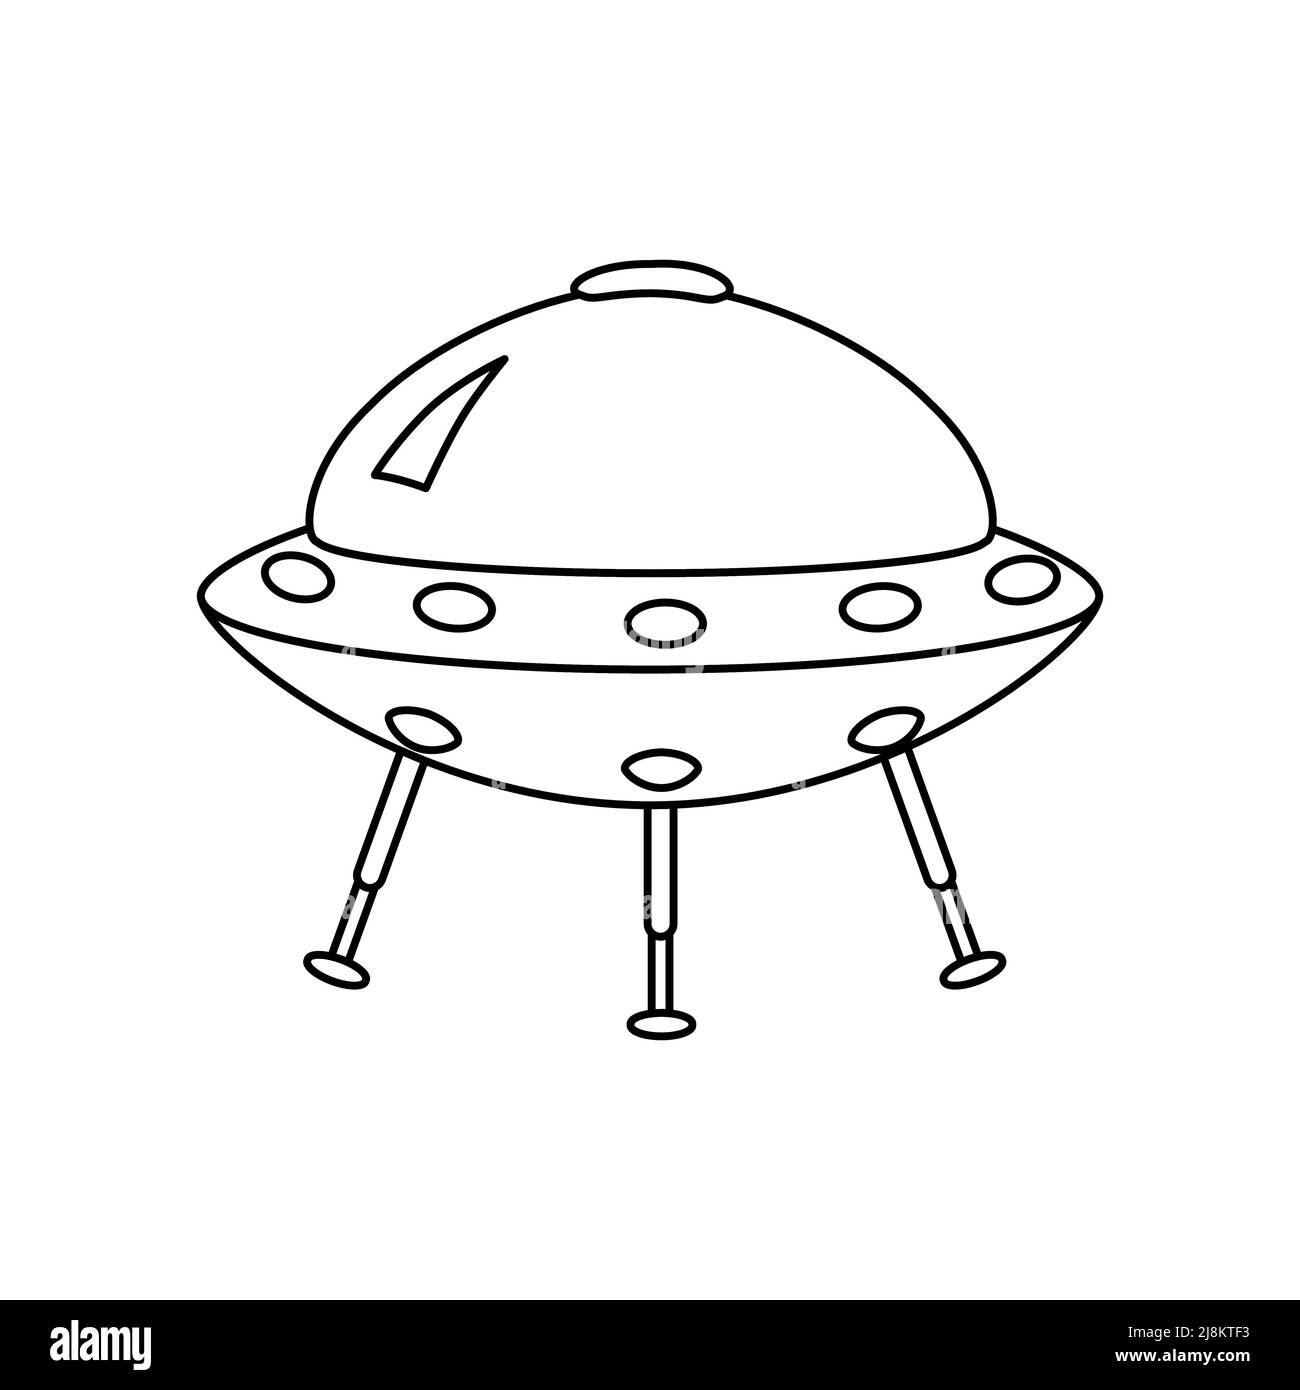 UFO icon, spacecraft of alien. Vector outline style illustration Stock Vector